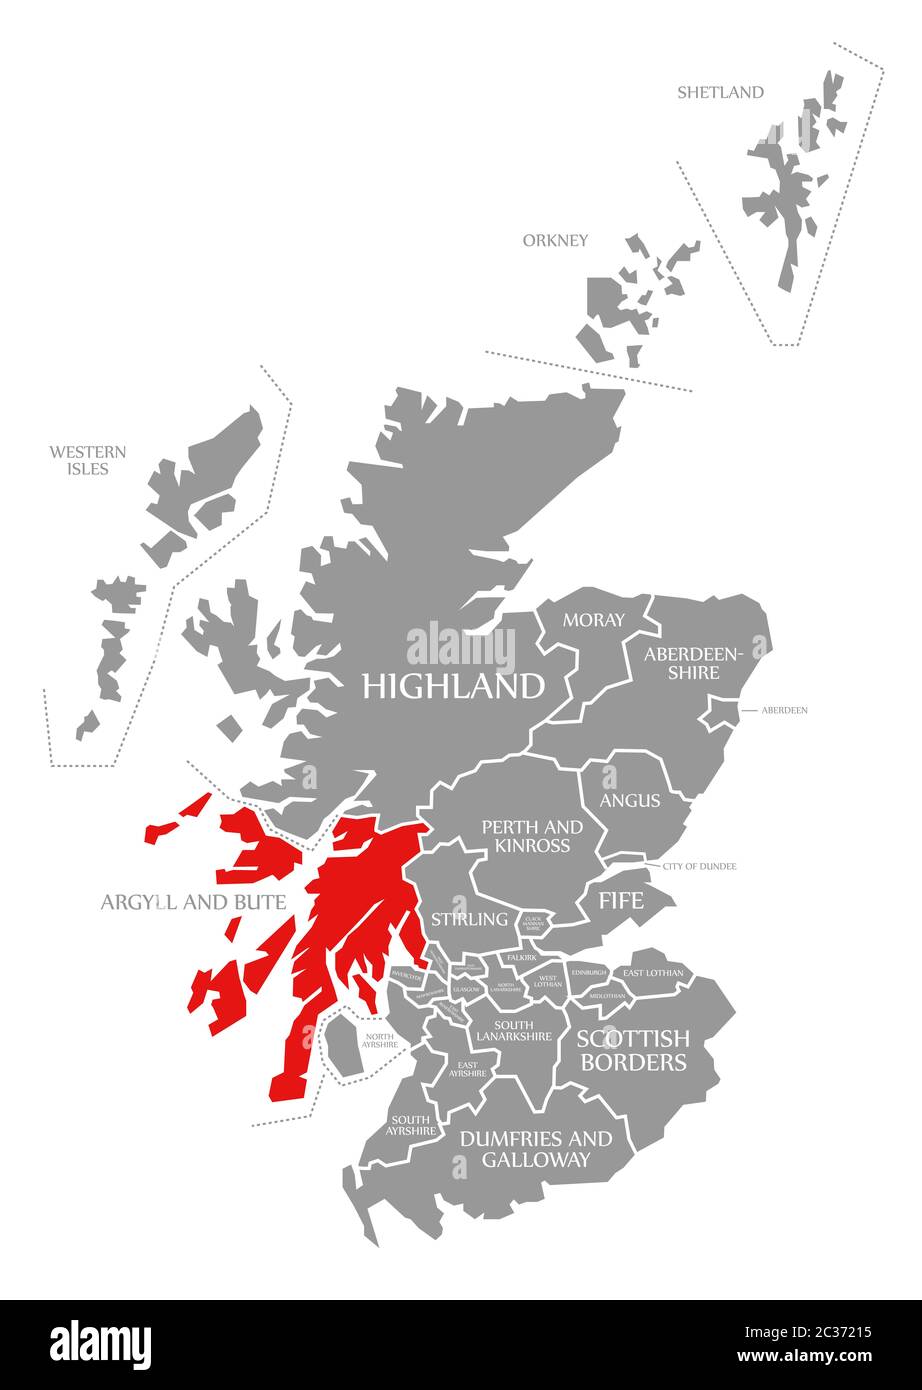 Argyll And Bute Red Highlighted In Map Of Scotland Uk 2C37215 